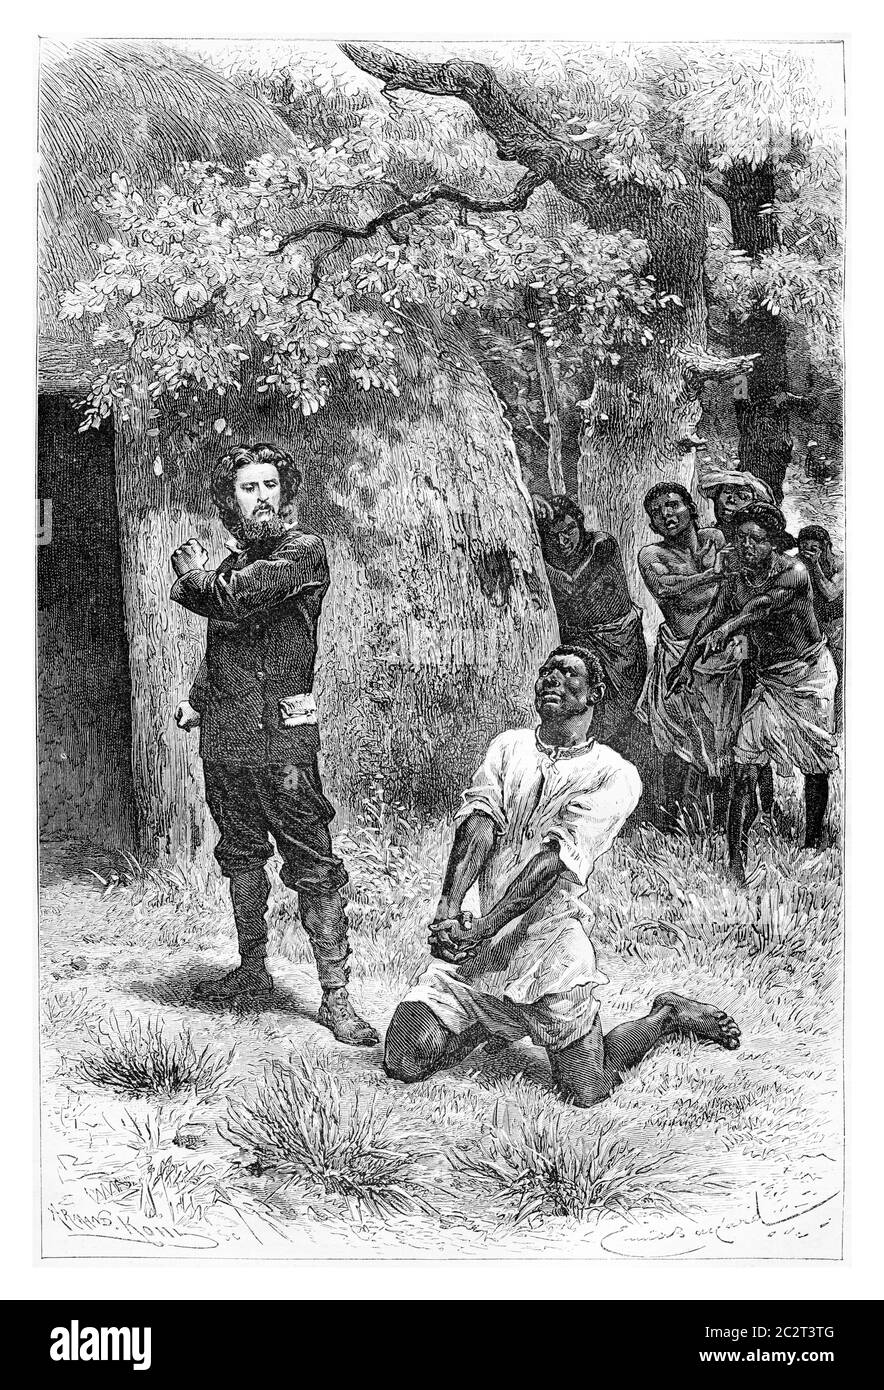 Aogousto Begs for Mercy in Front of Major Serpa Pinto in Angola, Southern Africa, drawing by Bayard based on a sketch and writings by Serpa Pinto, vin Stock Photo